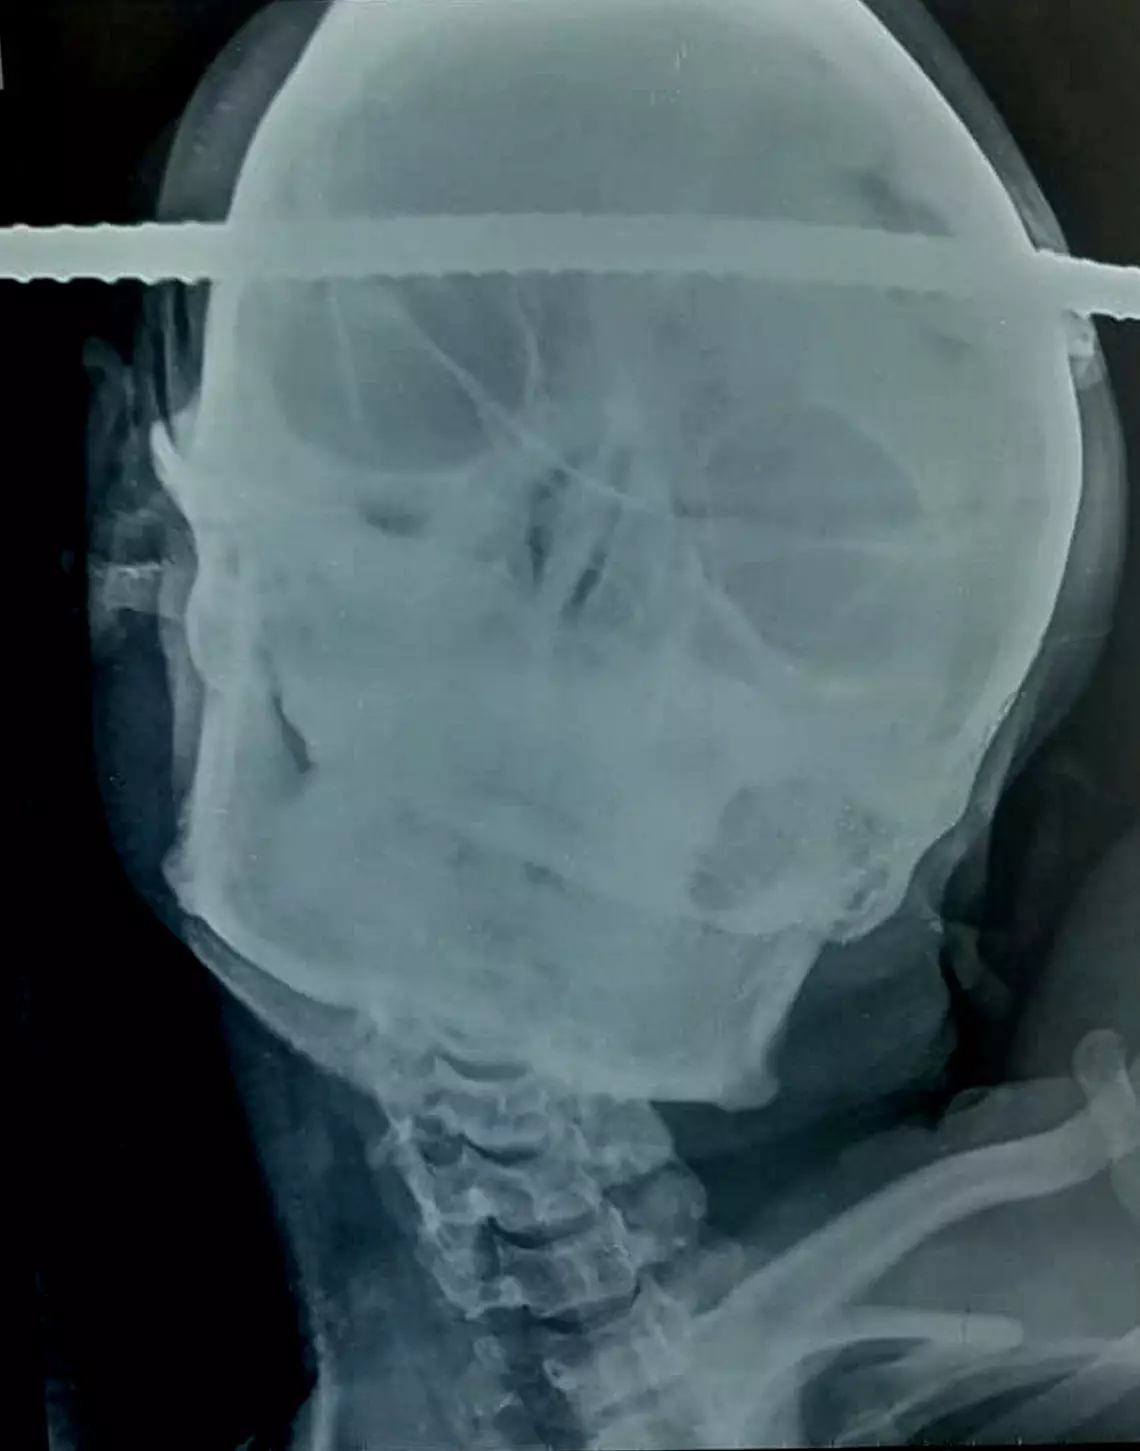 X-rays show the rod went straight through his head.